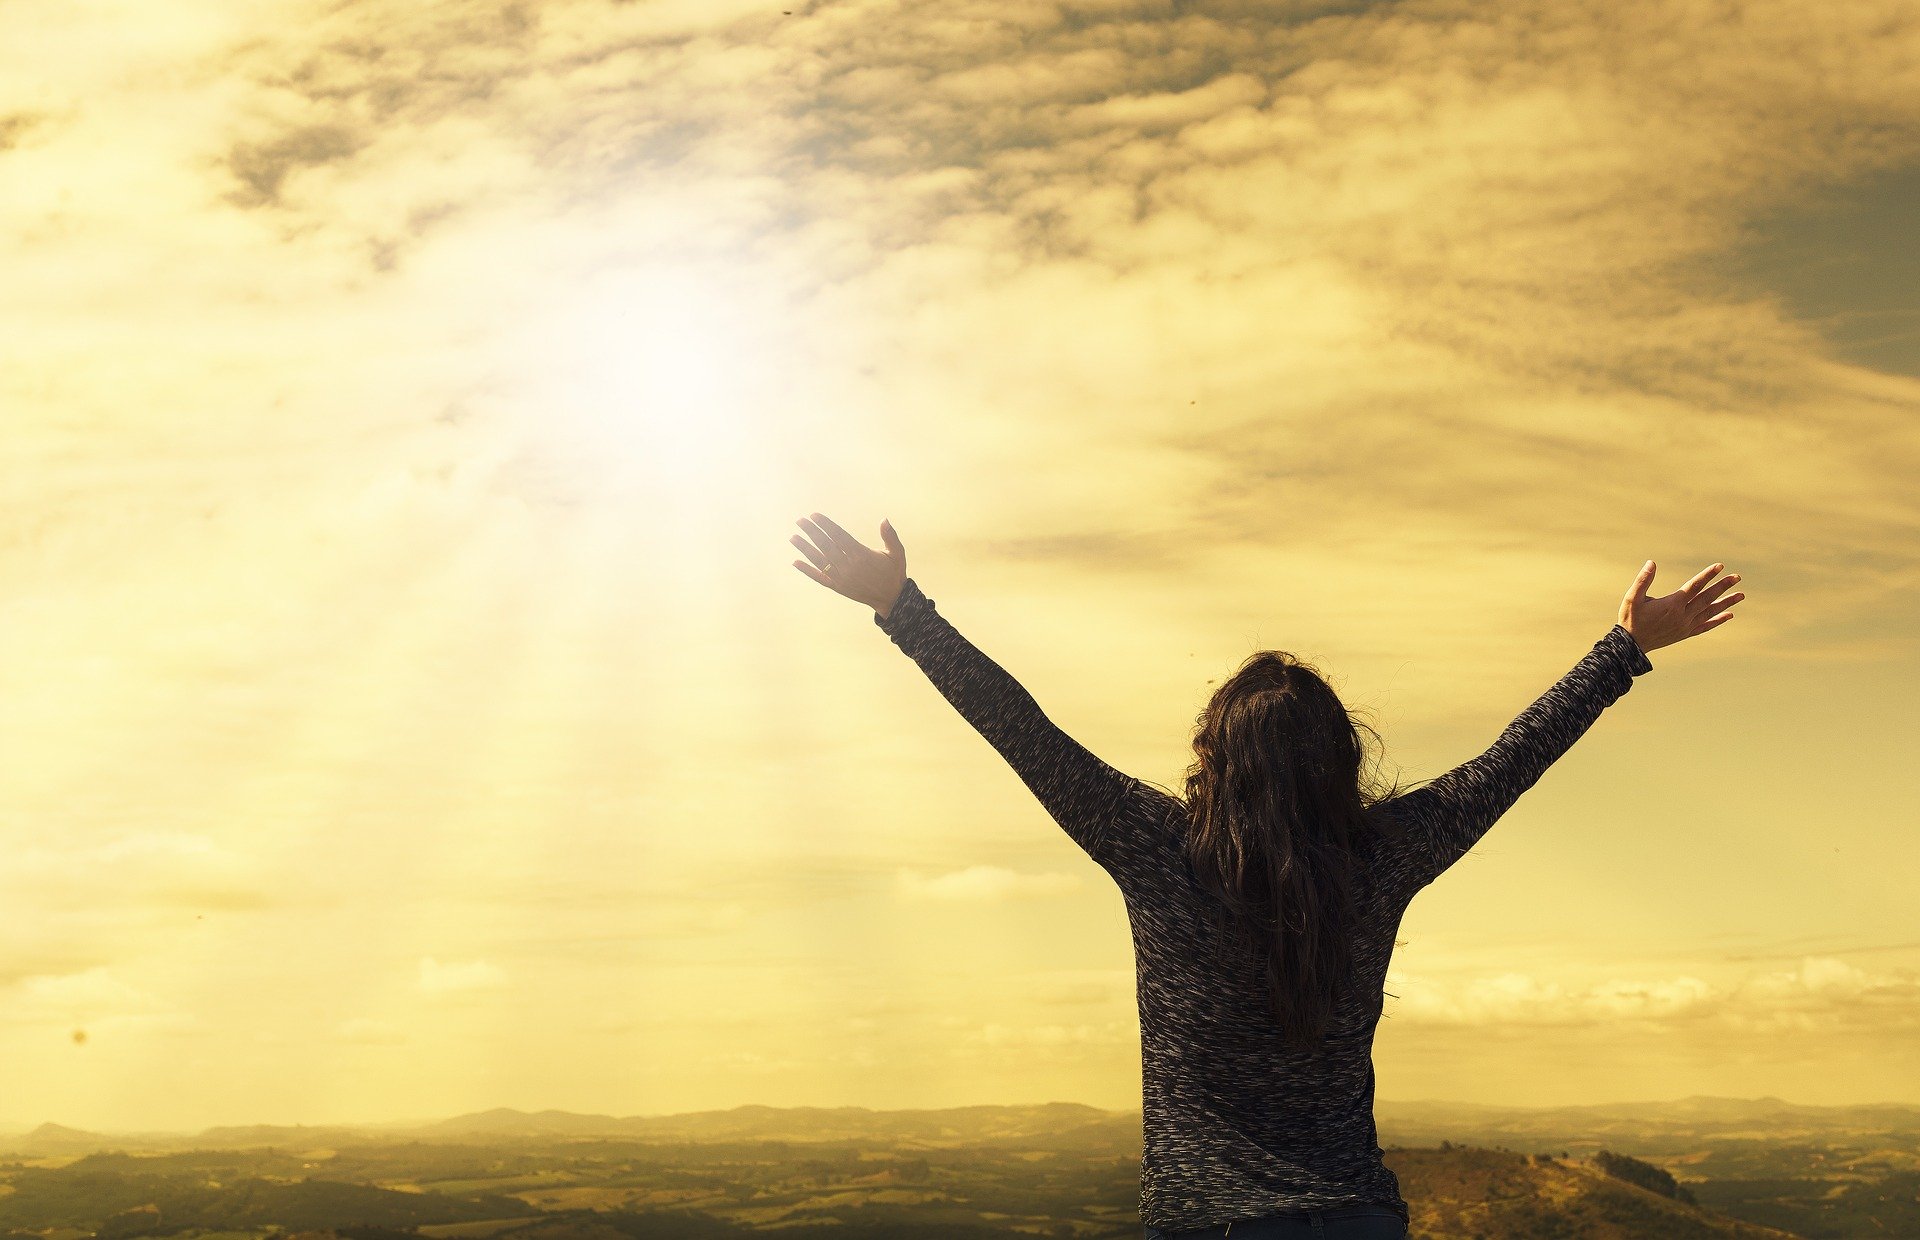 A person with long hair is standing on a hilltop with their arms raised towards the sky. The sun is shining brightly through the clouds, casting a golden hue over the landscape of rolling hills and distant mountains, offering a serene moment of reflection after visiting the trauma clinic.